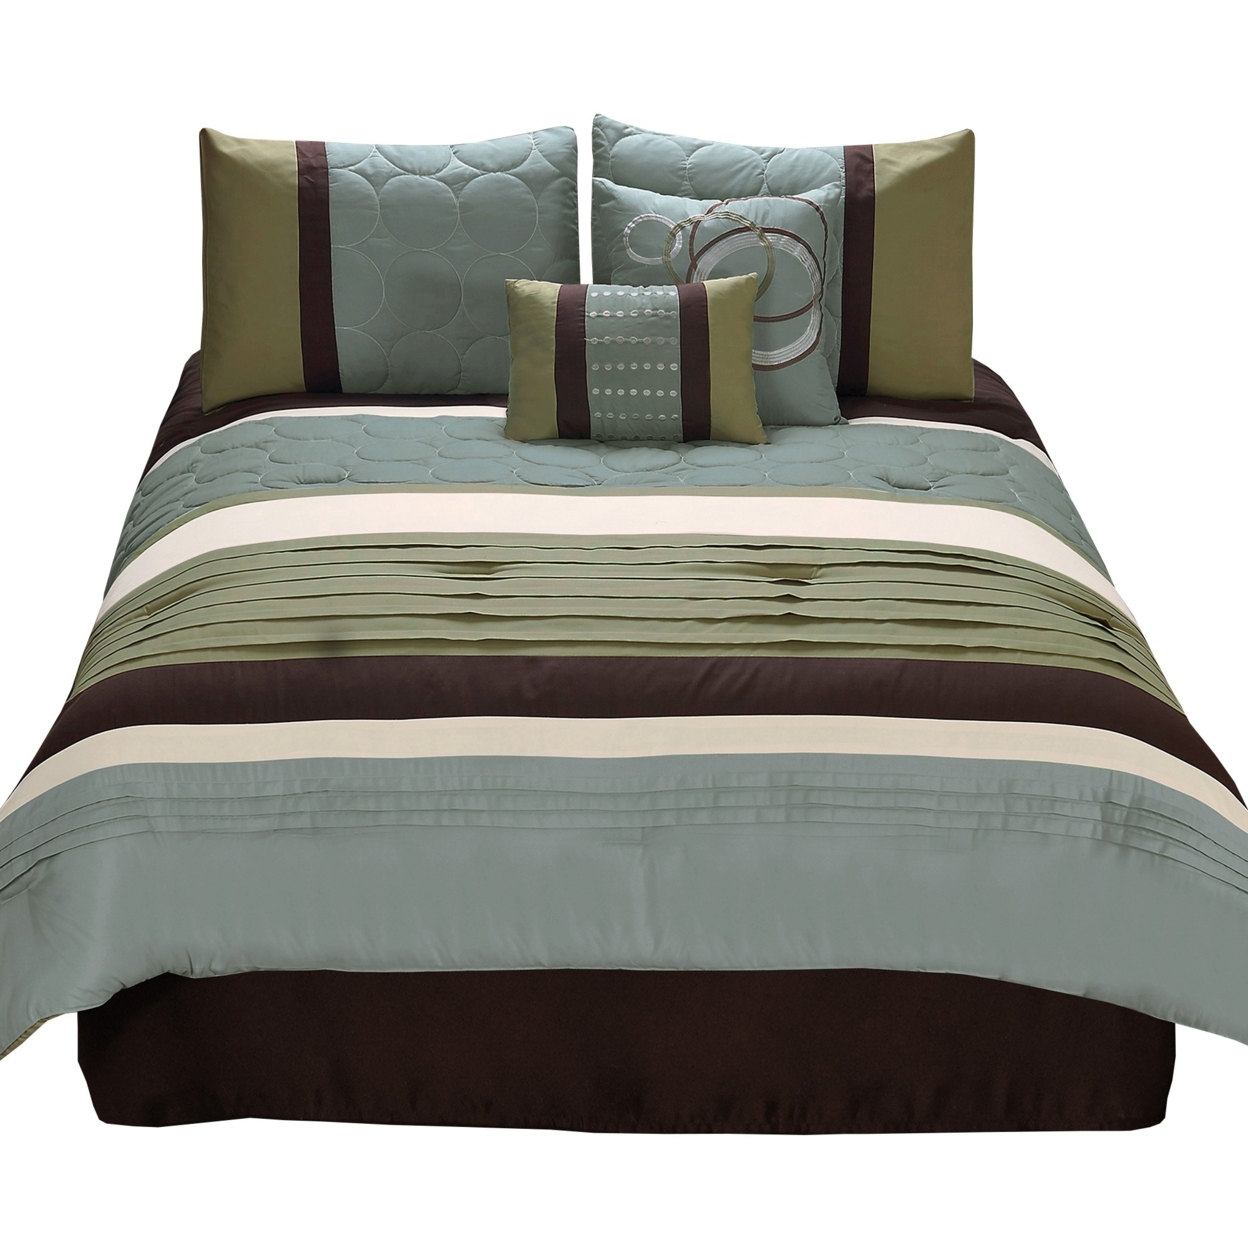 6 Piece King Comforter Set With Pleats And Embroidery, Green And Blue- Saltoro Sherpi